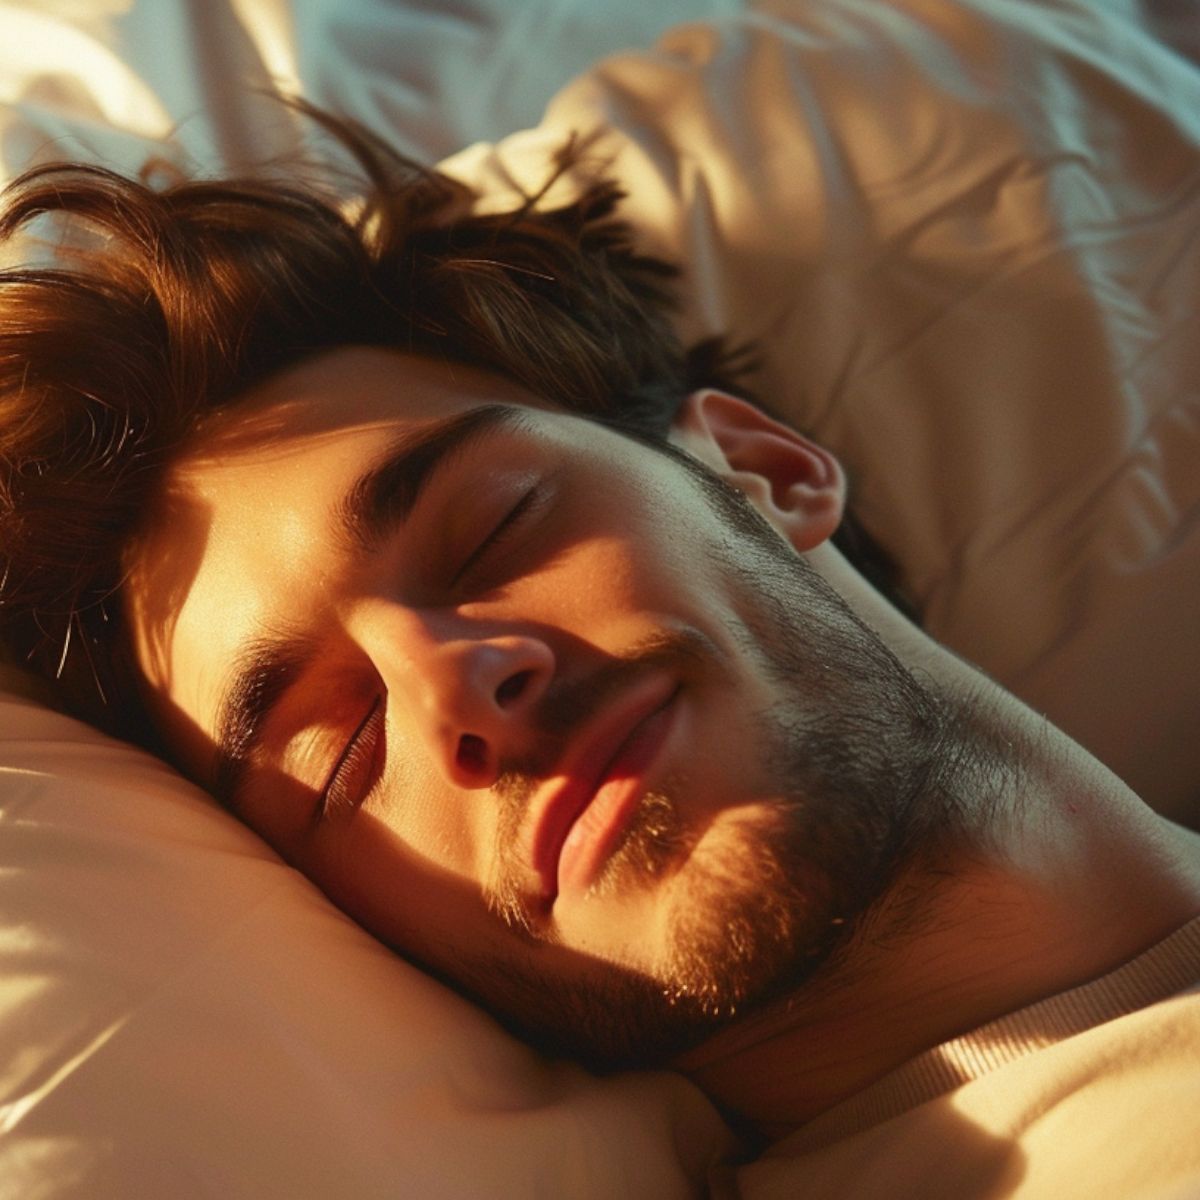 A man with a beard is sleeping in a bed with his eyes closed